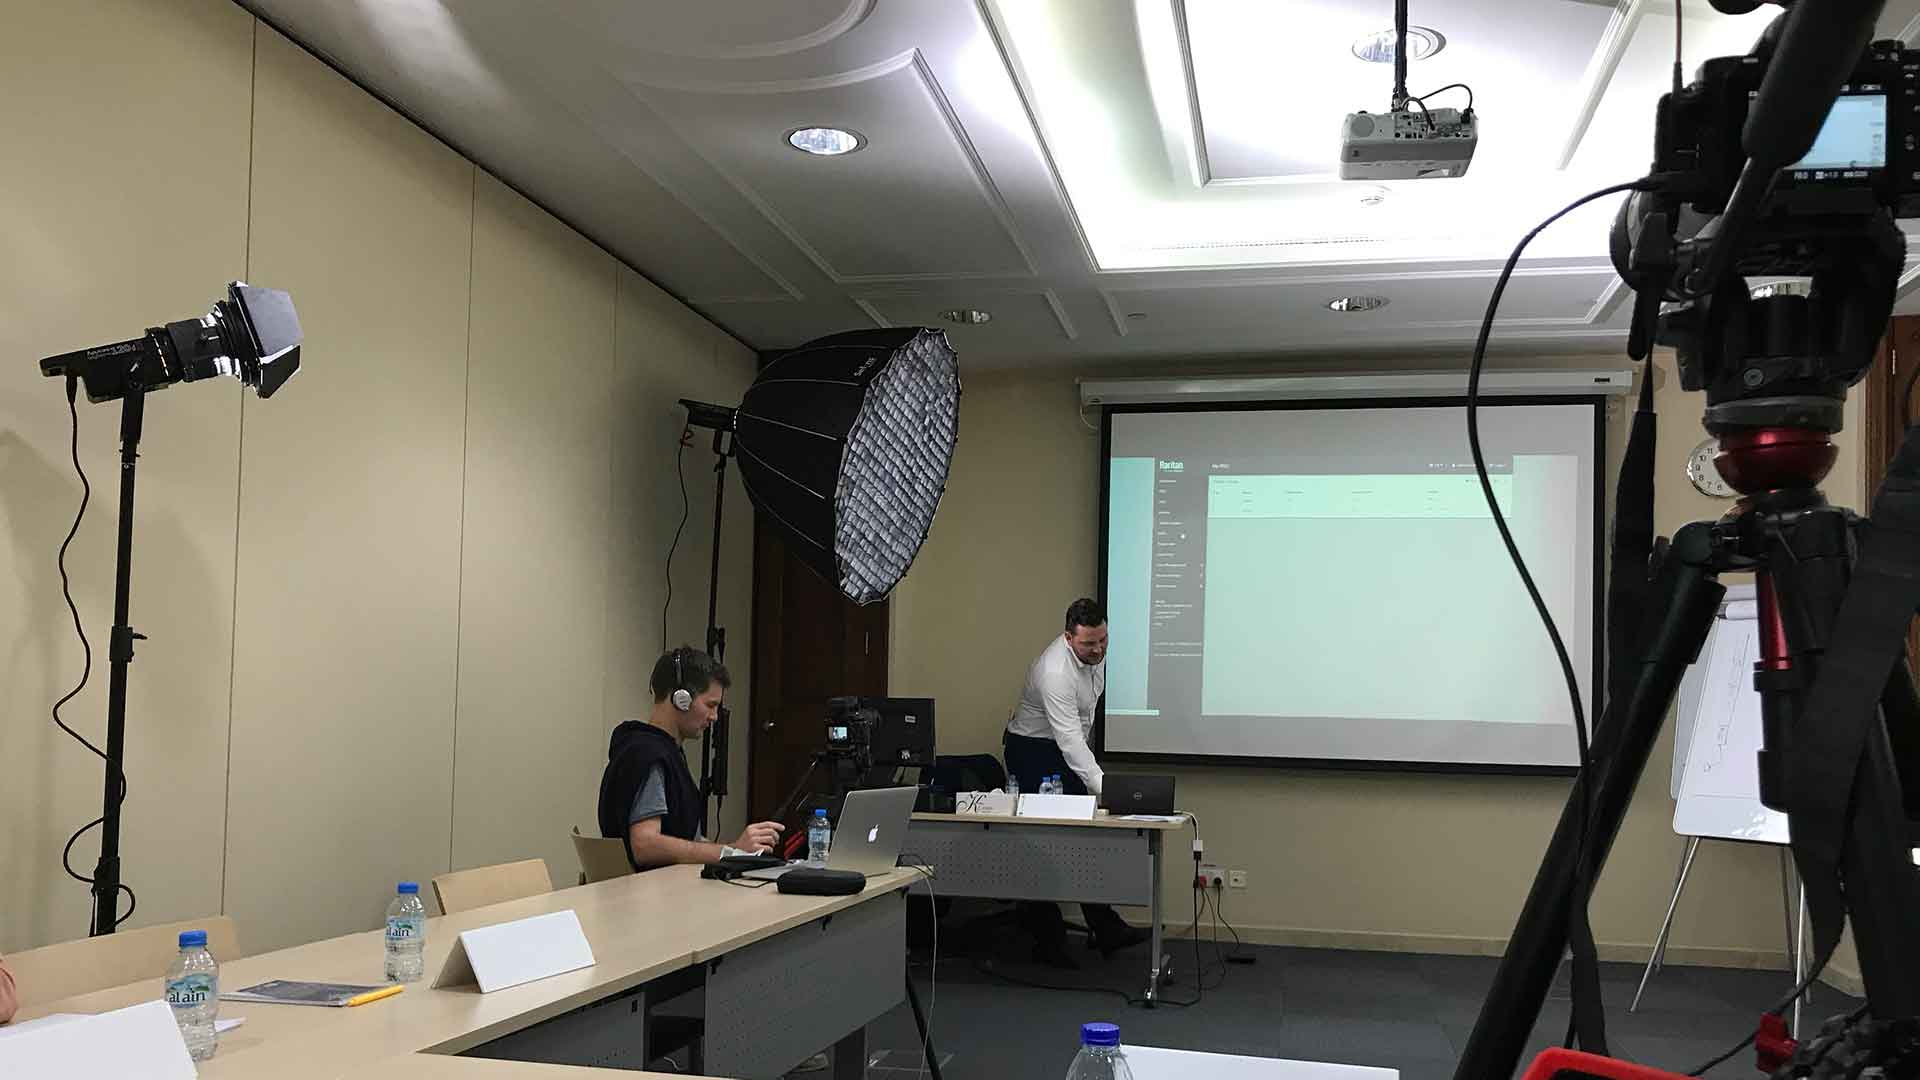 Getting Ready To Make A Live Presentation Training Video - FIVE Pictures